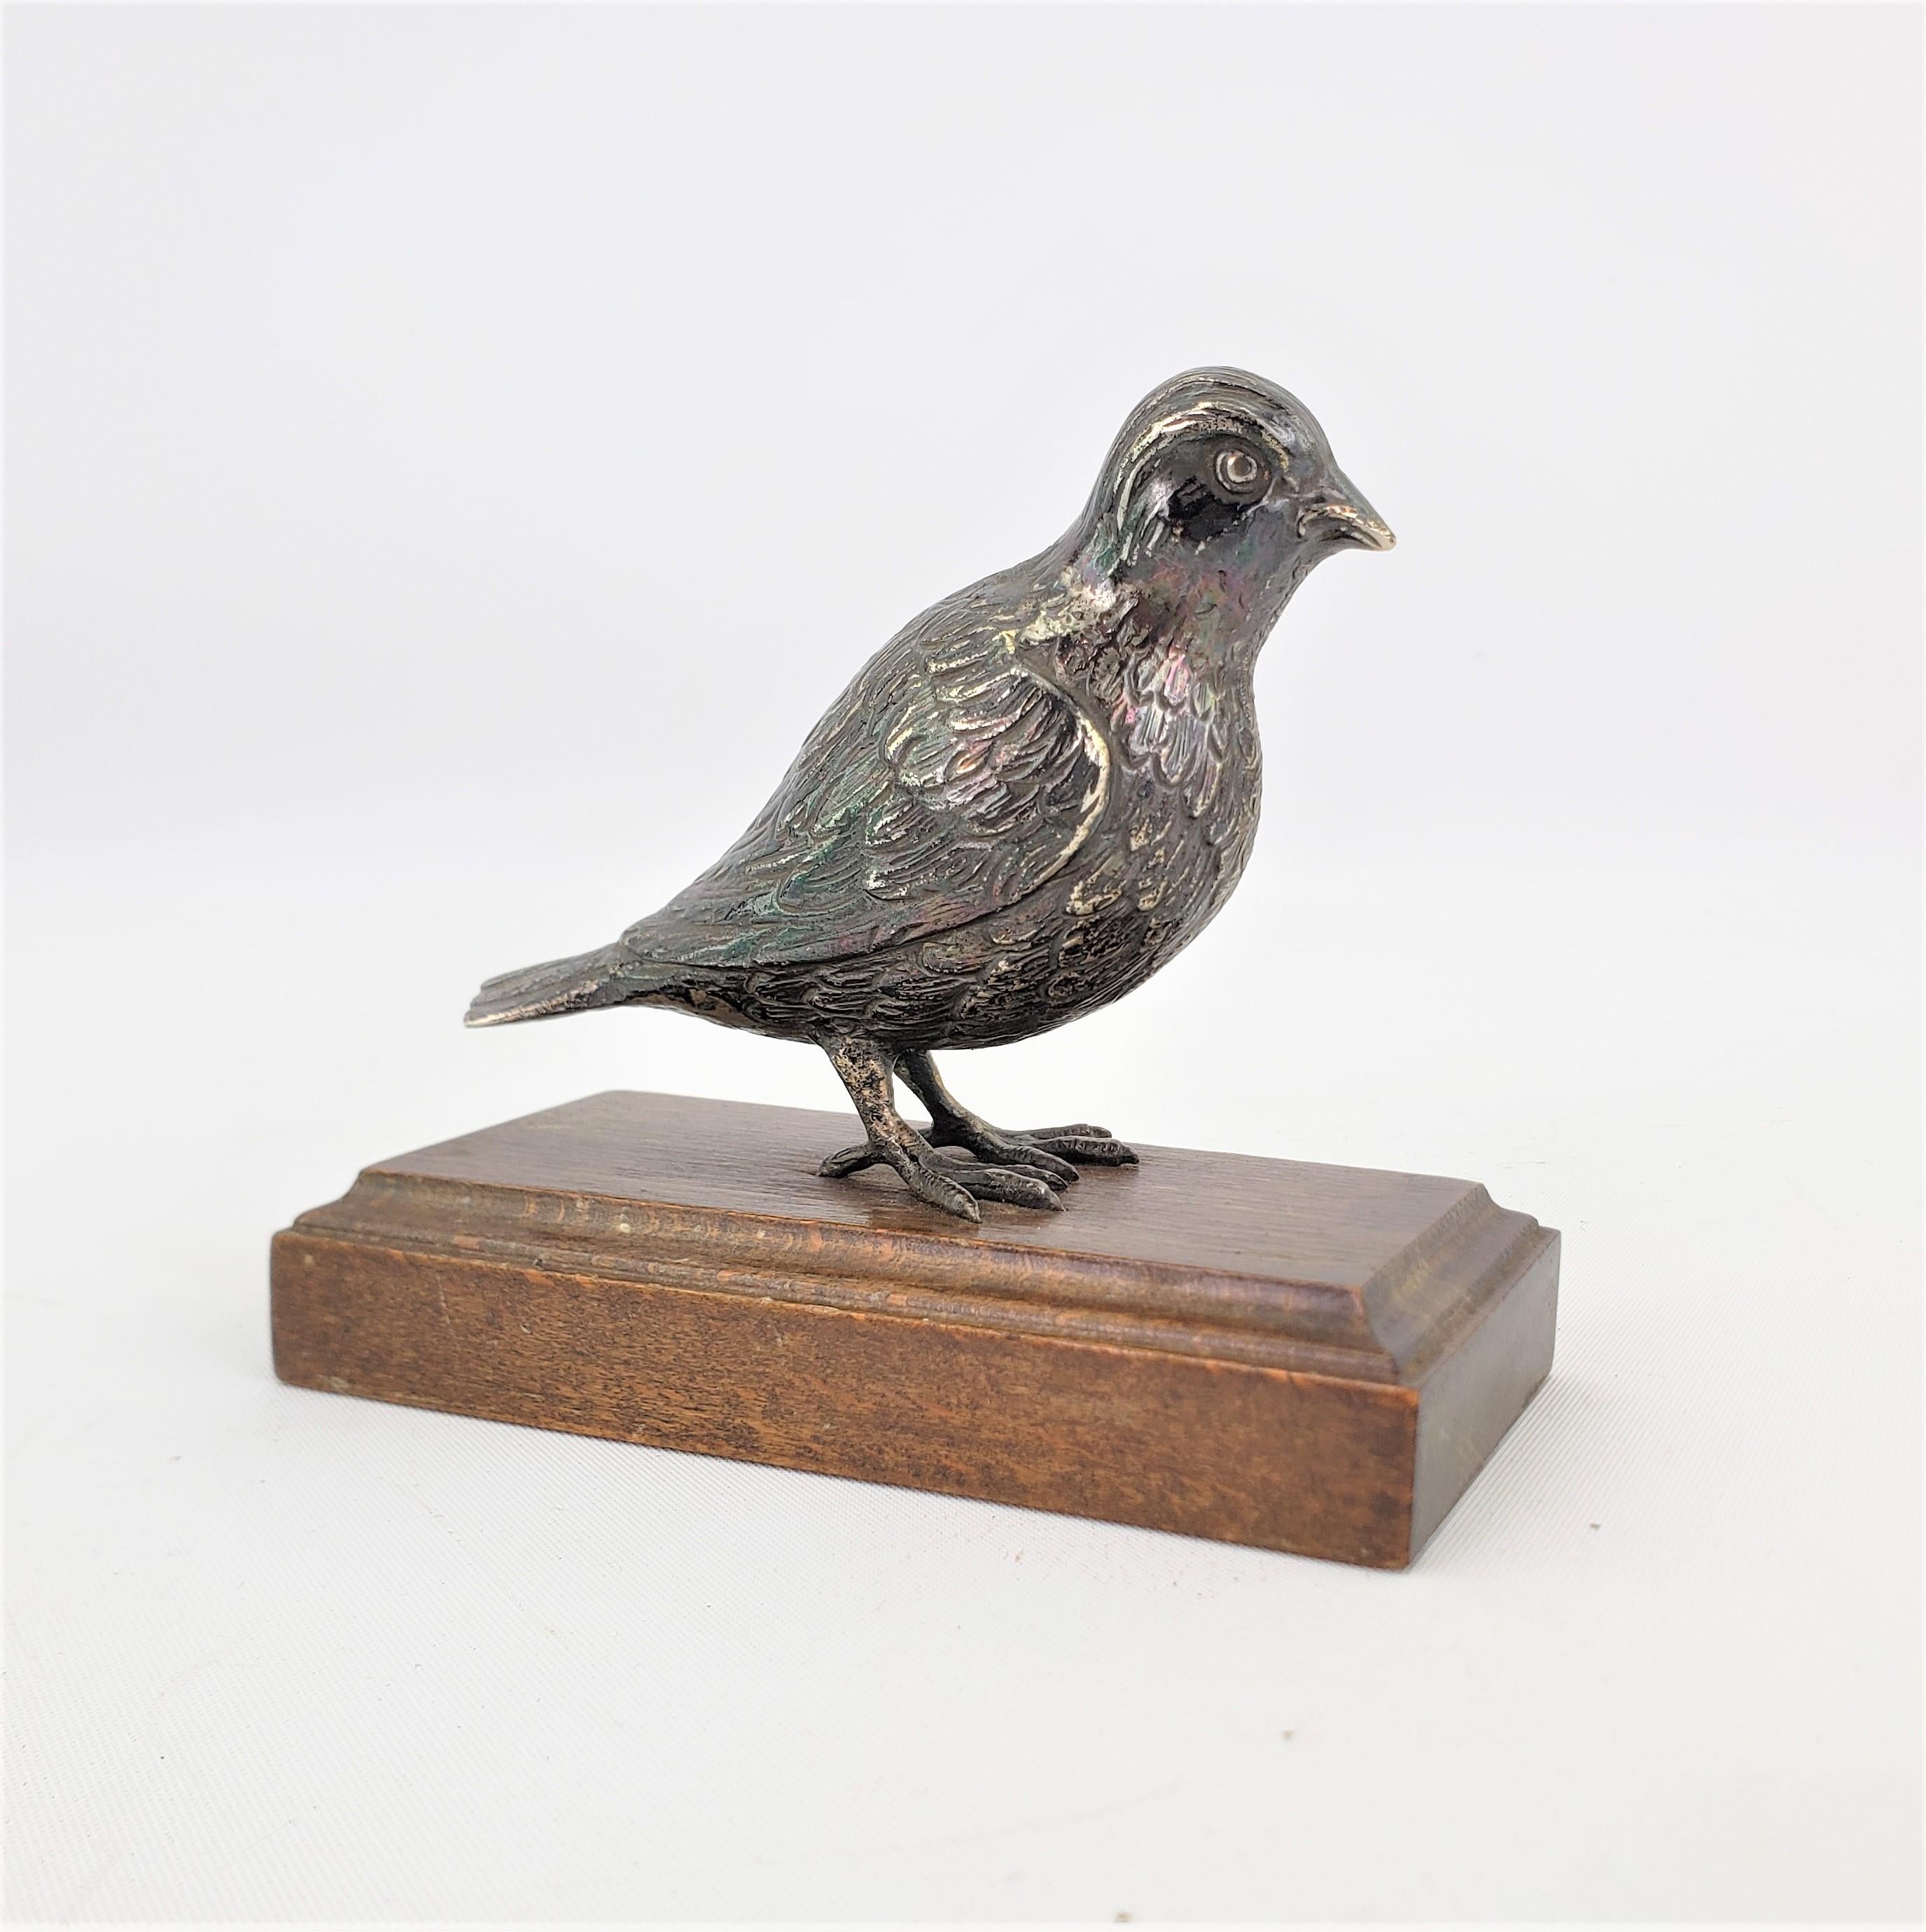 This antique cast silver bird sculpture is unsigned, but presumed to have originated from Europe, likely Austria or Italy and date to approximately 1920 and done in a realistic style. The cast silver bird is very well executed showing realistic